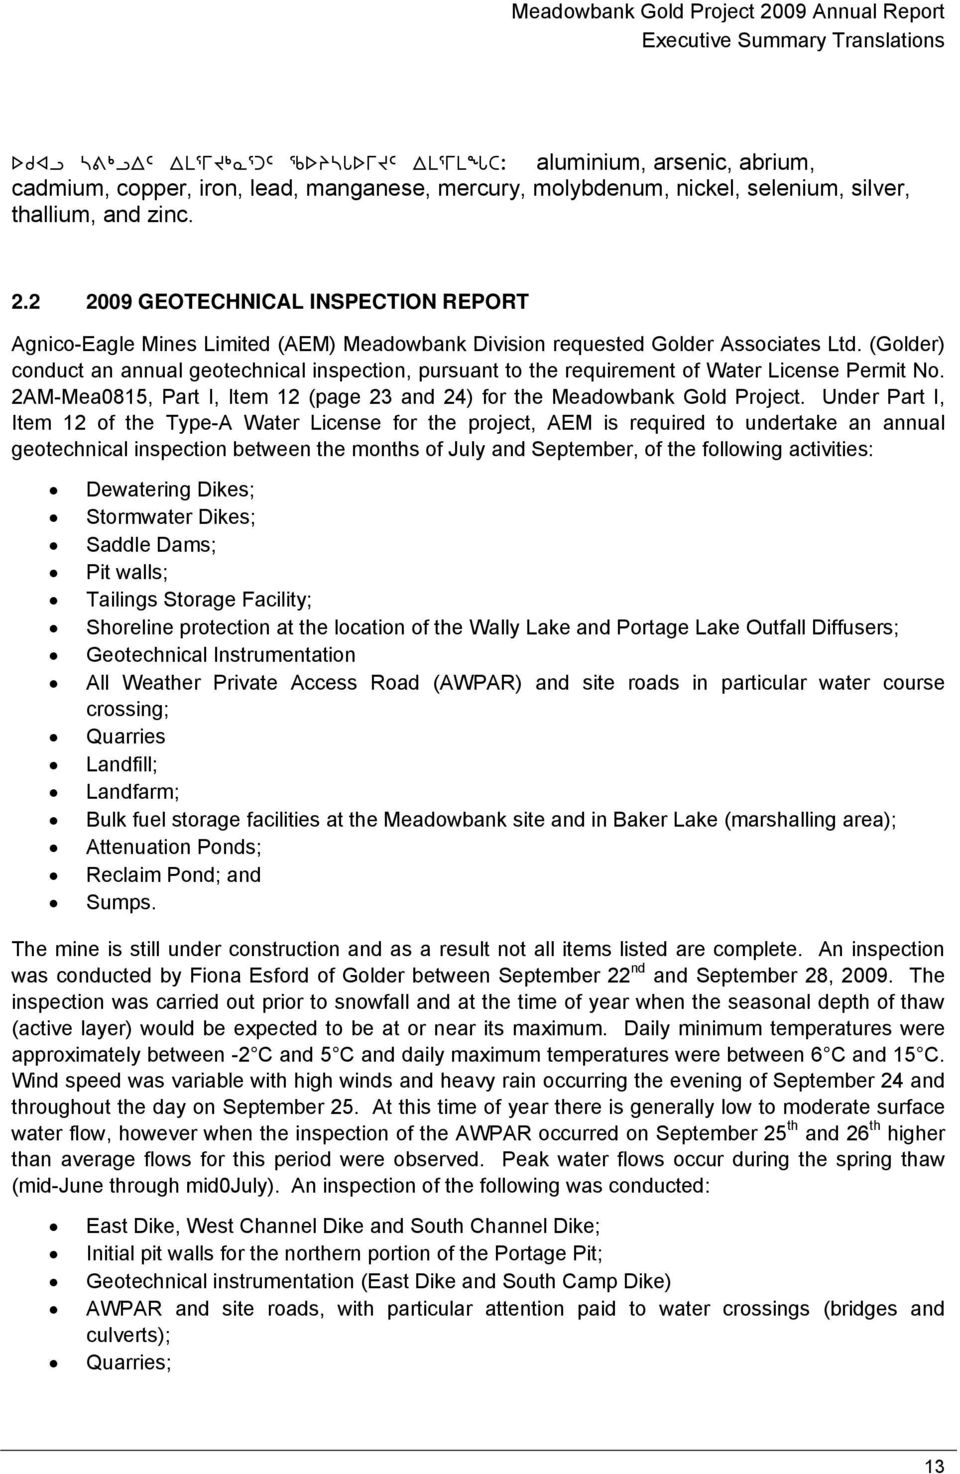 (Golder) conduct an annual geotechnical inspection, pursuant to the requirement of Water License Permit No. 2AM-Mea0815, Part I, Item 12 (page 23 and 24) for the Meadowbank Gold Project.